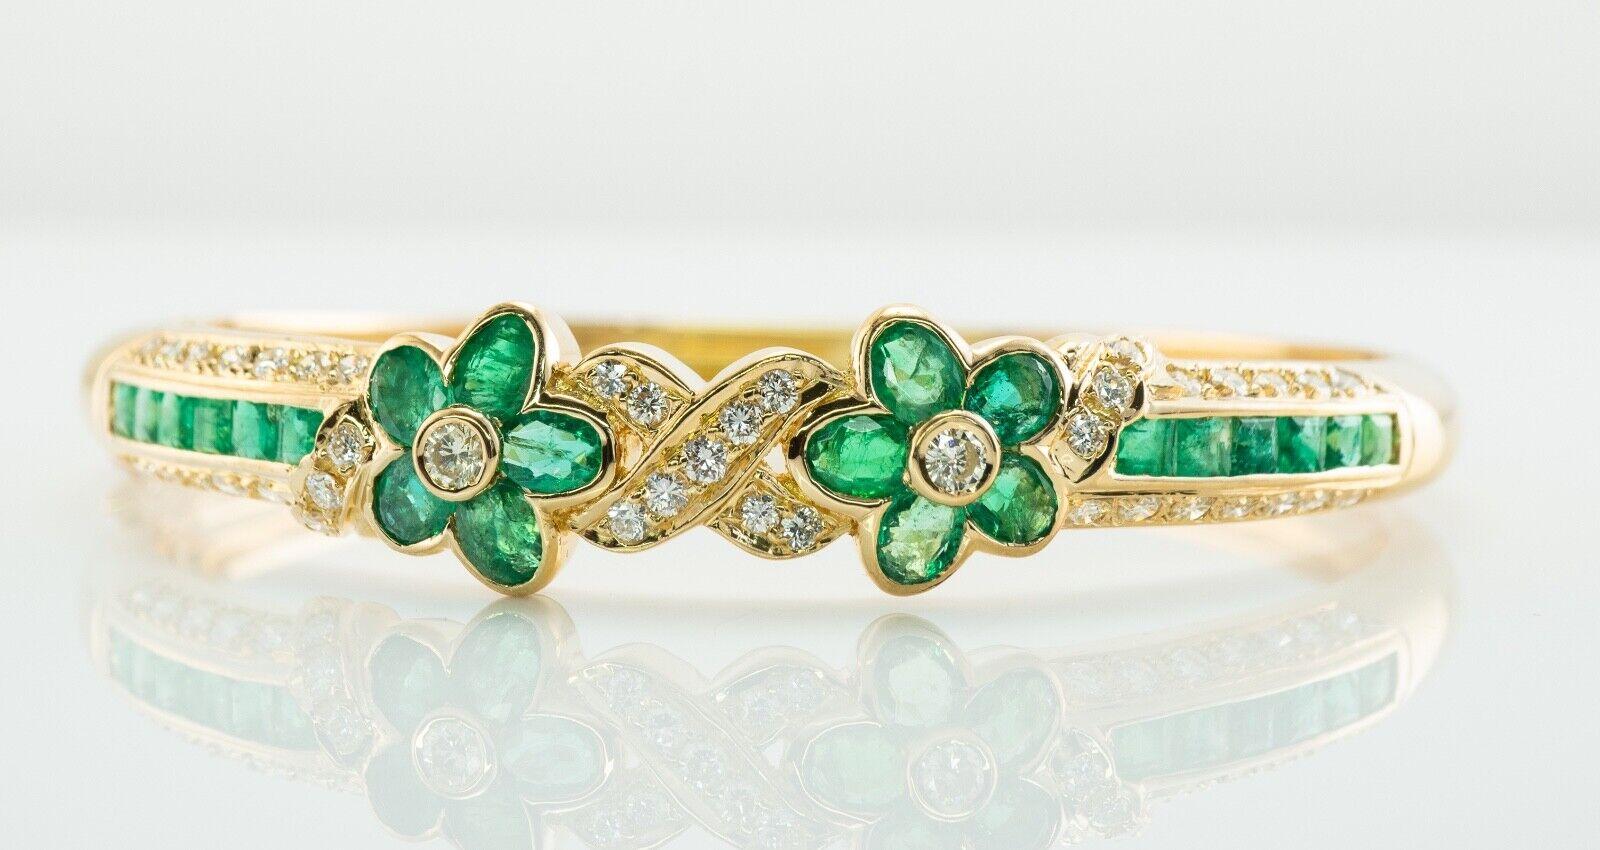 This amazing estate bracelet is finely crafted in solid 18K Yellow Gold (carefully tested and guaranteed) and set with genuine Earth mined Emeralds and Diamonds. Ten oval cut Emeralds arranged in the floral setting are 4mm x 3mm each. Twelve channel